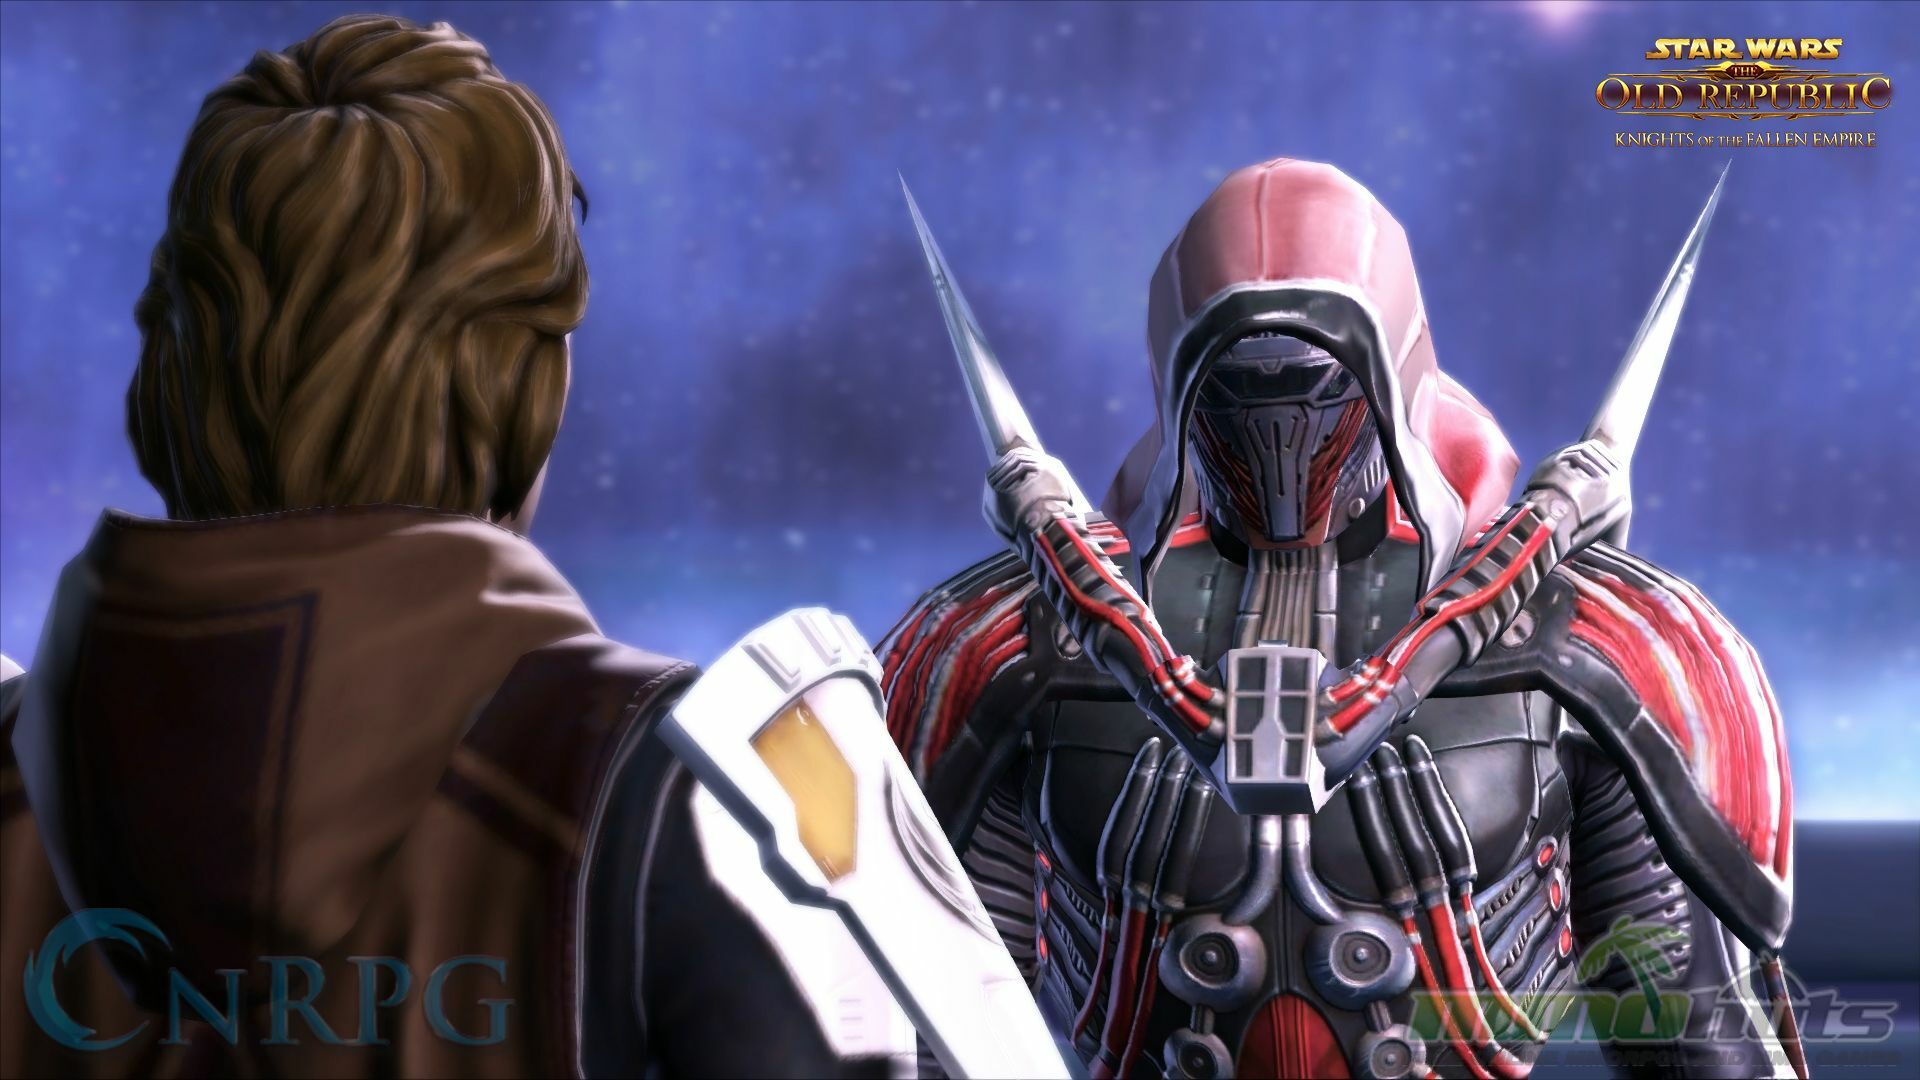 SWTOR: Knights of the Fallen Empire Press Event Preview